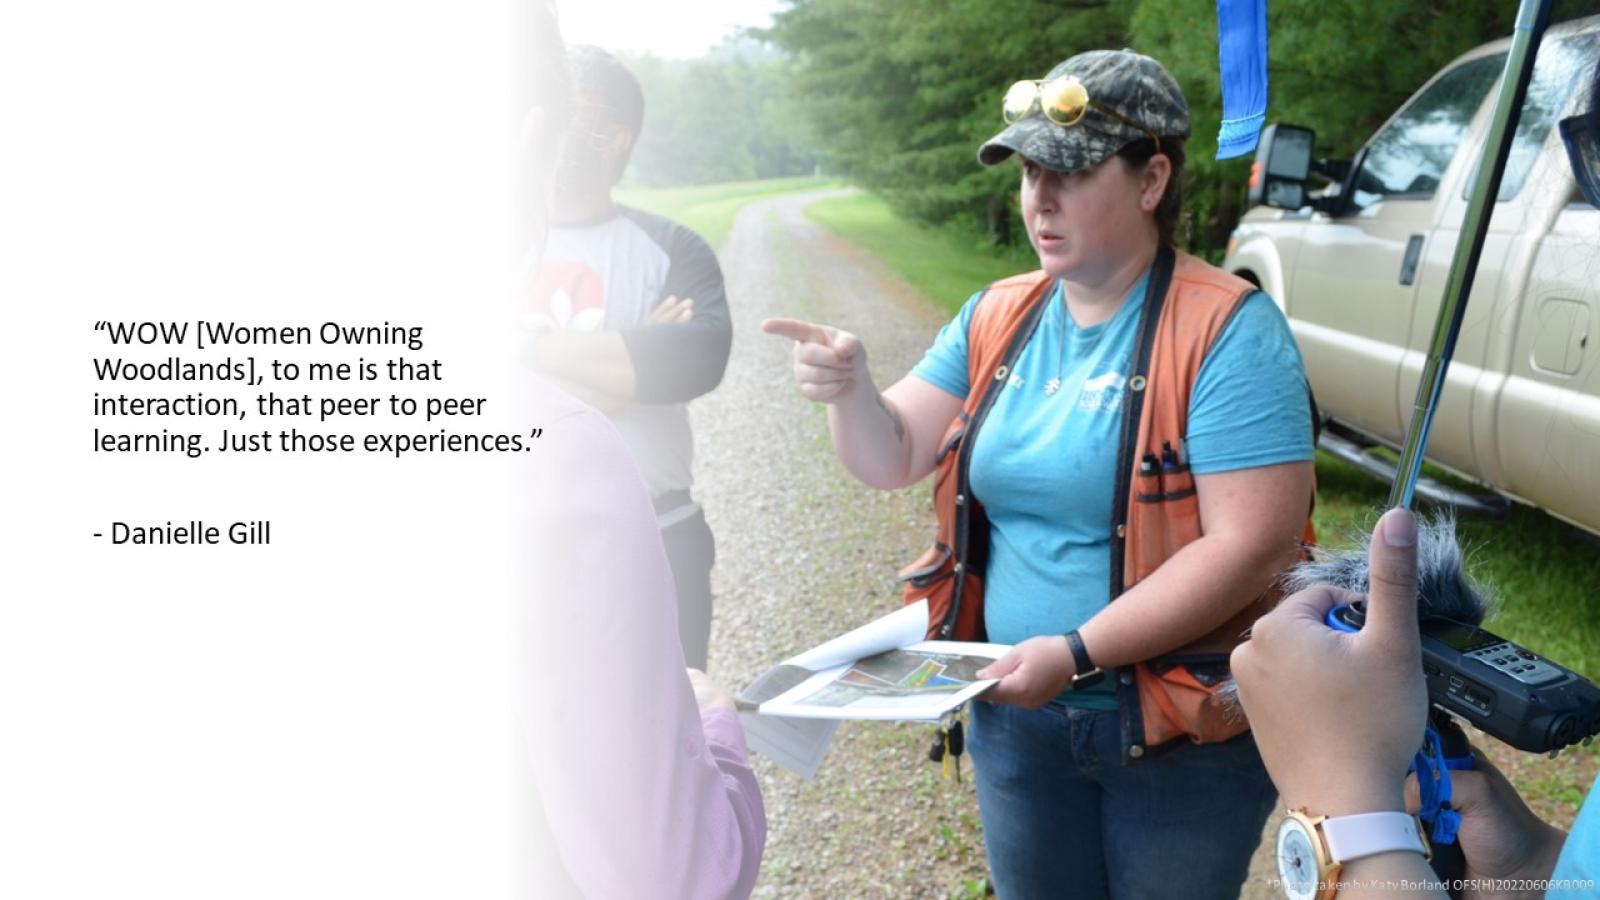 Dani Gill (one of the current leaders of Southeast Ohio Women Owning Woodlands) explaining EQIP plans during a site visit to the landowners and visitors. Quote taken from an interview with Dani on 6/7/22.